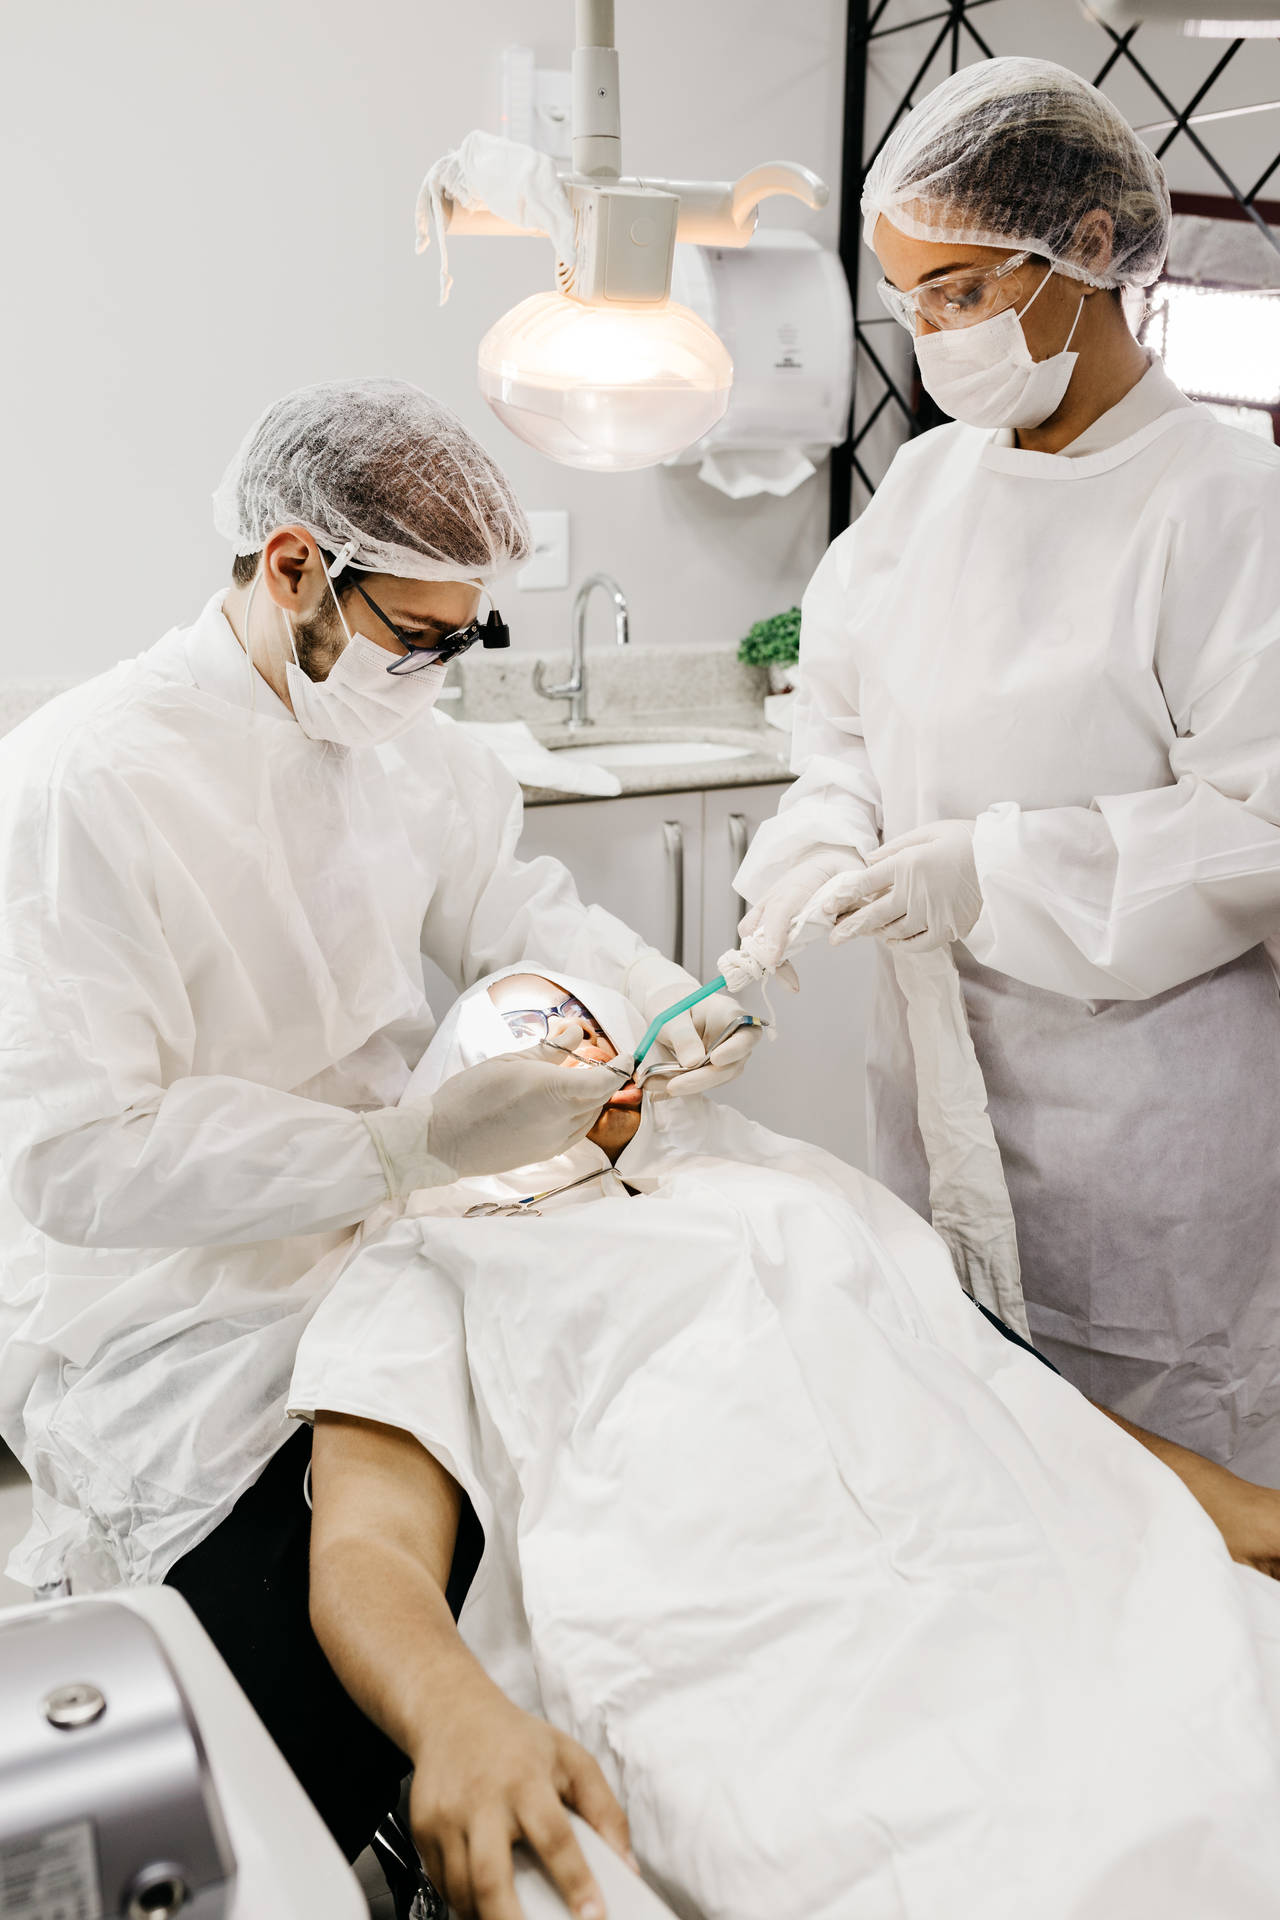 Dentists In Scrubs With Patient Dentistry Background